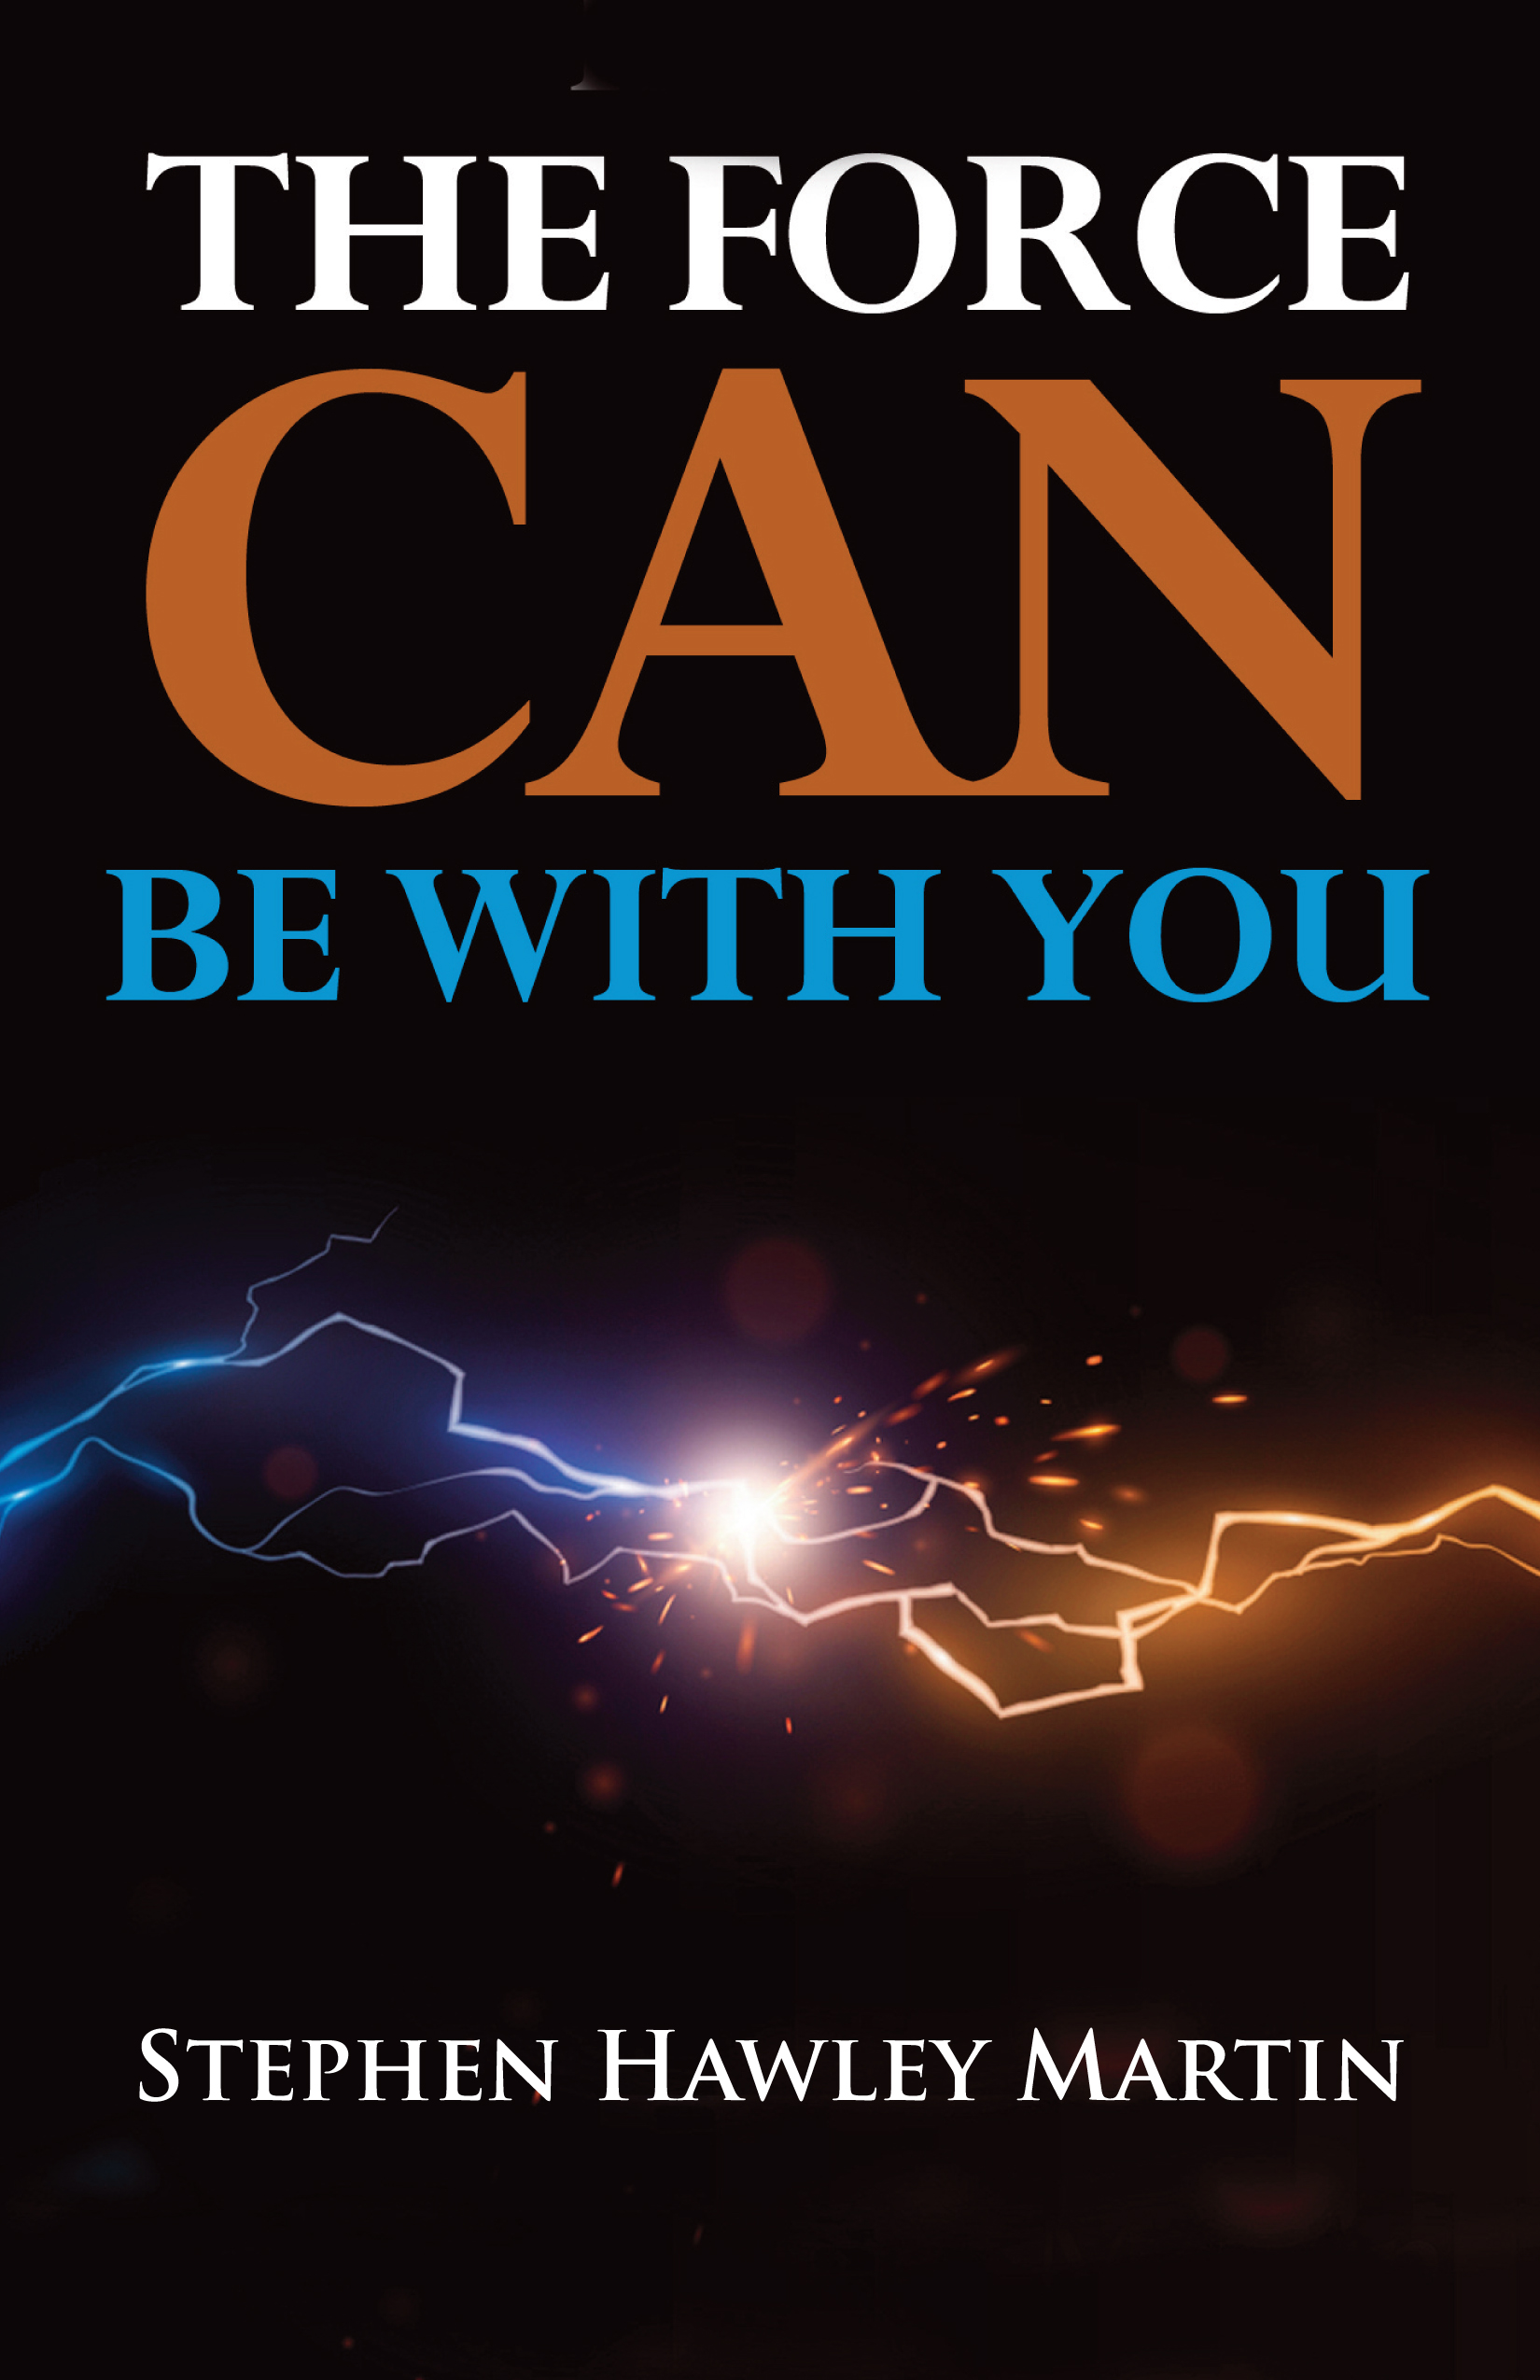 Just Published: “The Force Can Be With You,” a New Book by Stephen Hawley Martin